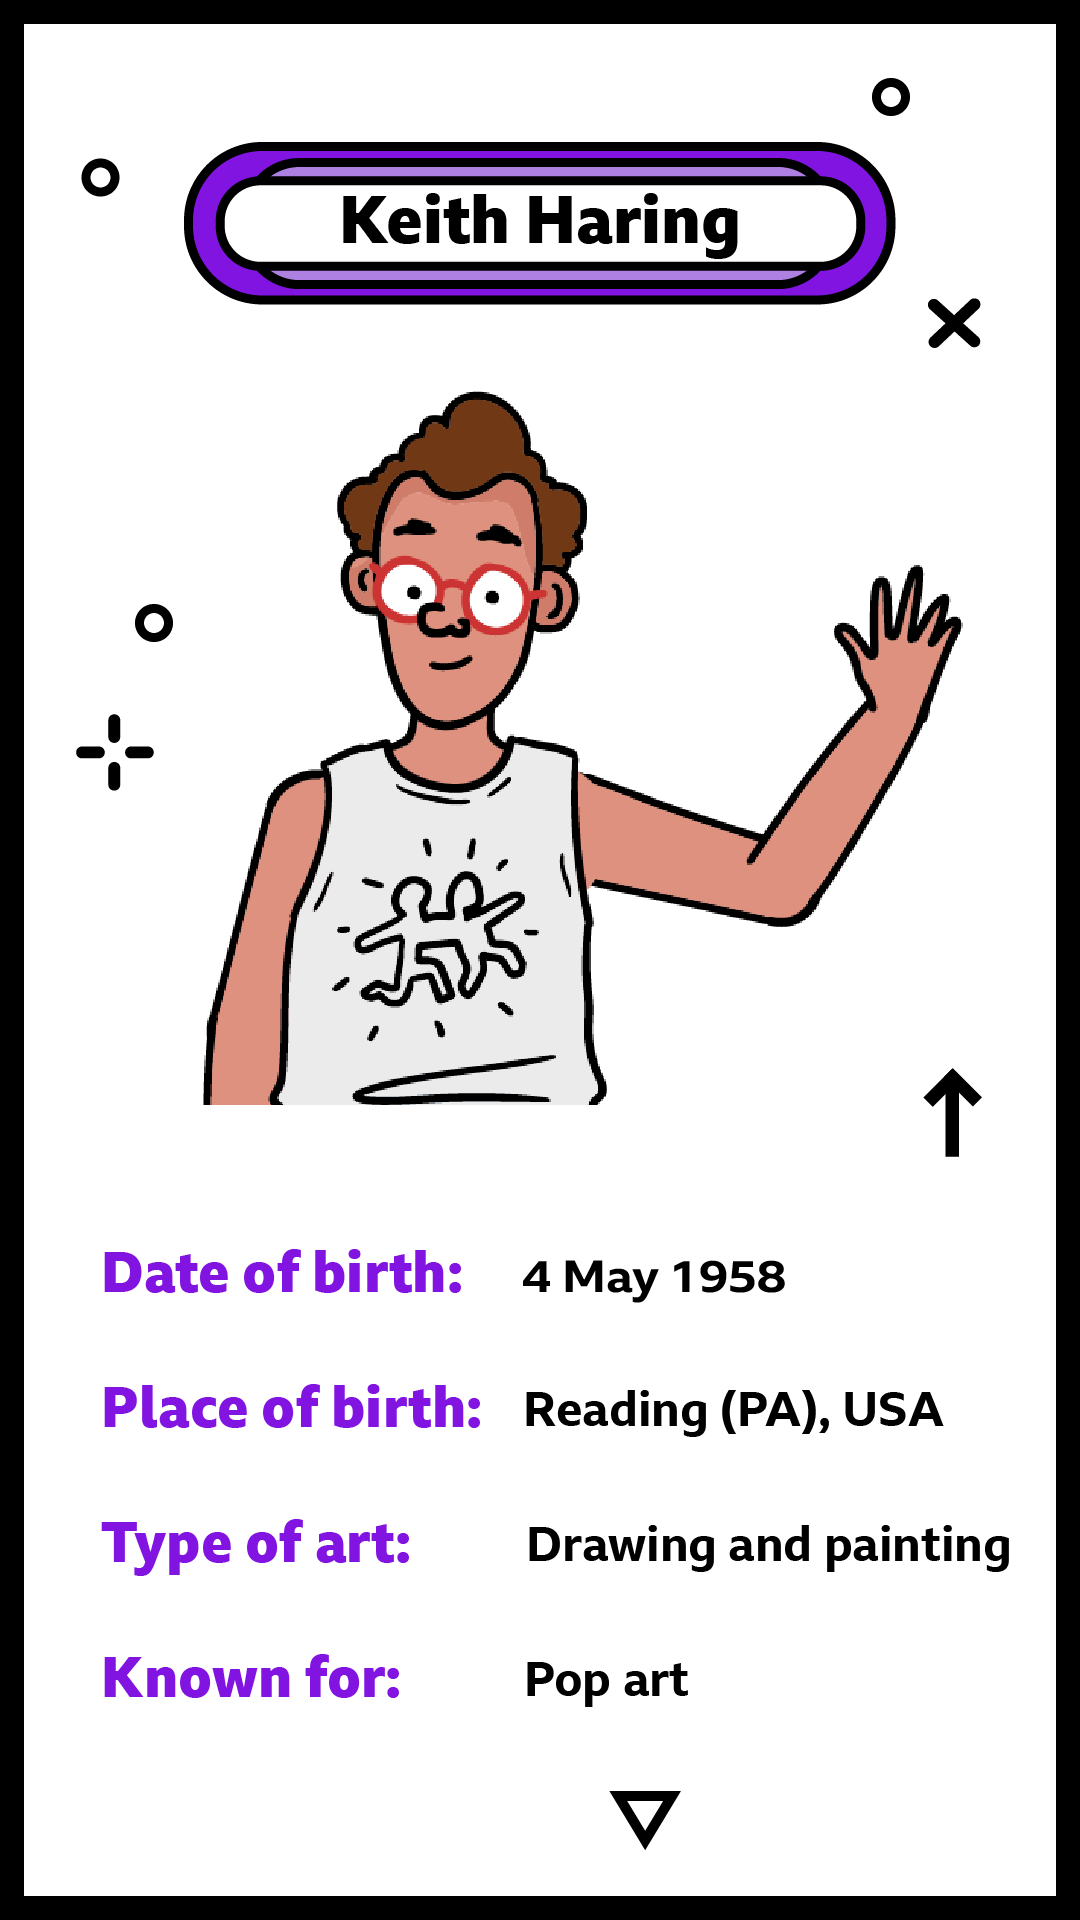 Details on Haring's date and place of birth, his type of art and what he's known for